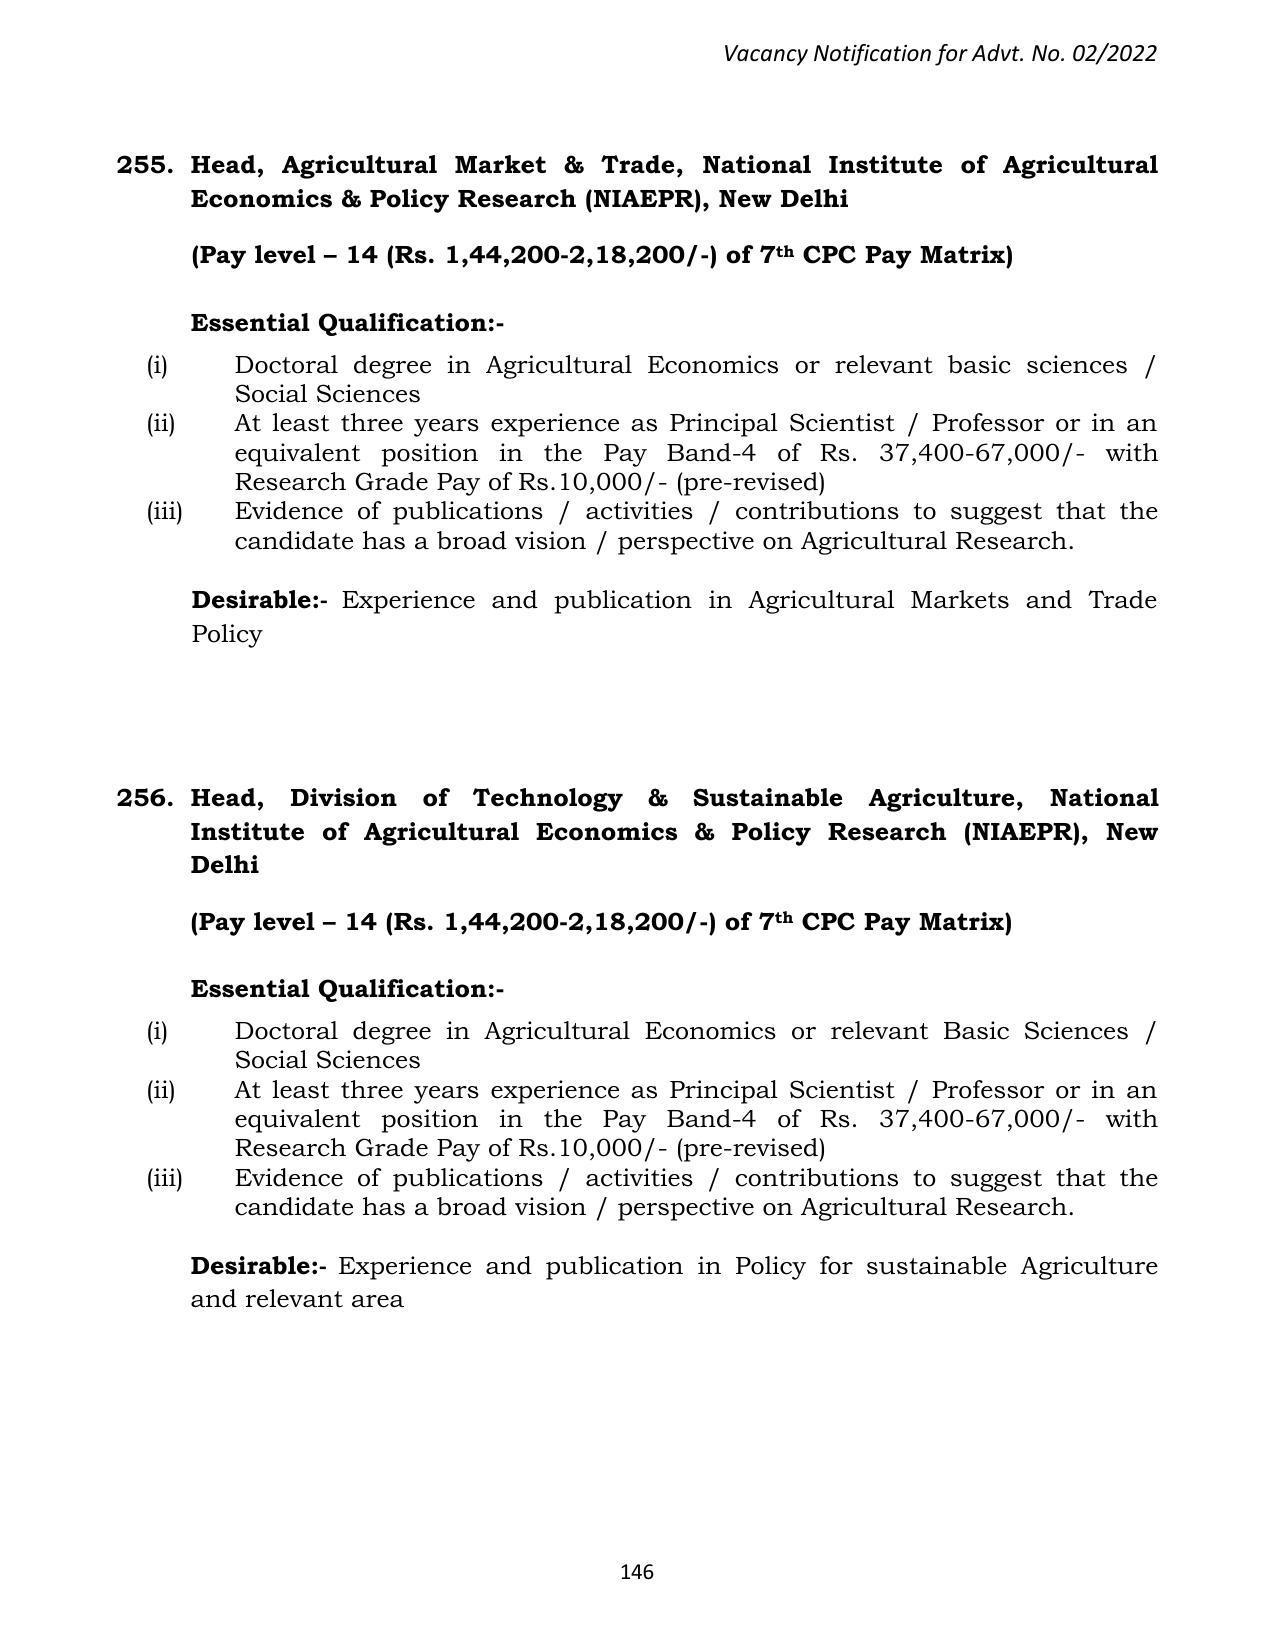 ASRB Non-Research Management Recruitment 2022 - Page 121